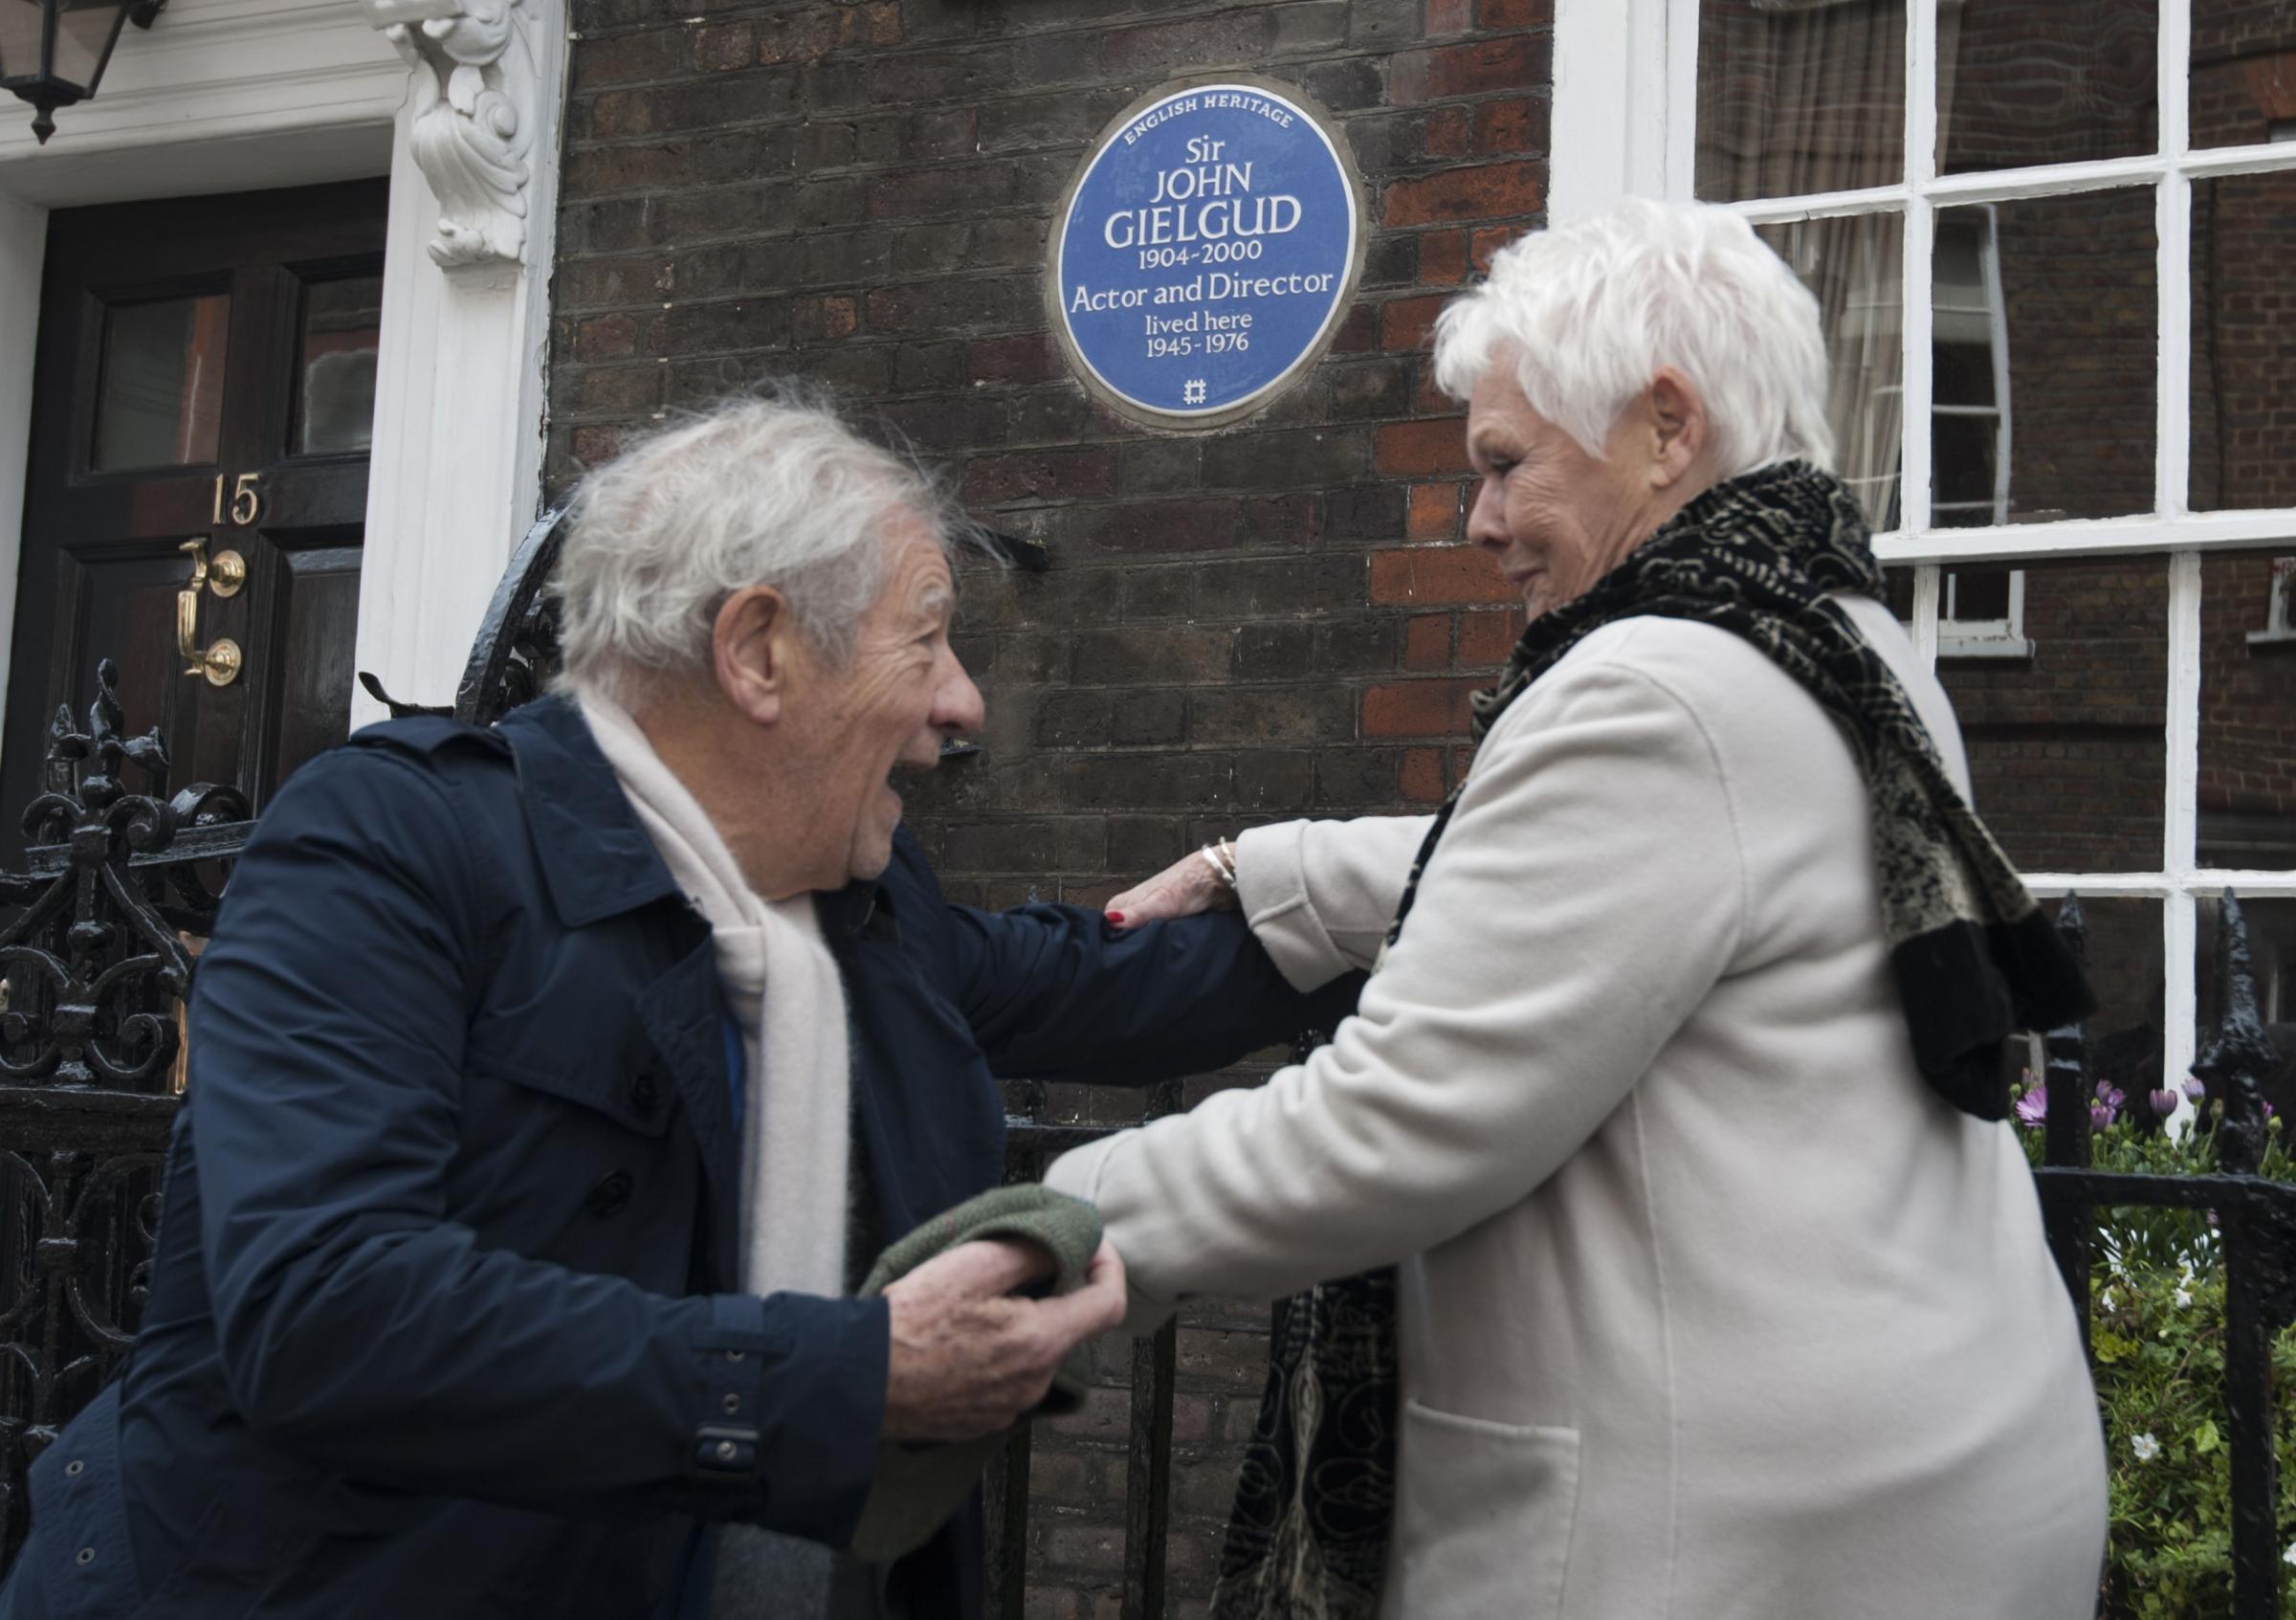 Dame Judi Dench and Sir Ian McKellen at the unveiling an English Heritage blue plaque to commemorate Sir John Gielgud at number 16 Cowley Street in Westminster, London, where he lived for 31 years.Picture by Lauren Hurley/PA Wire.